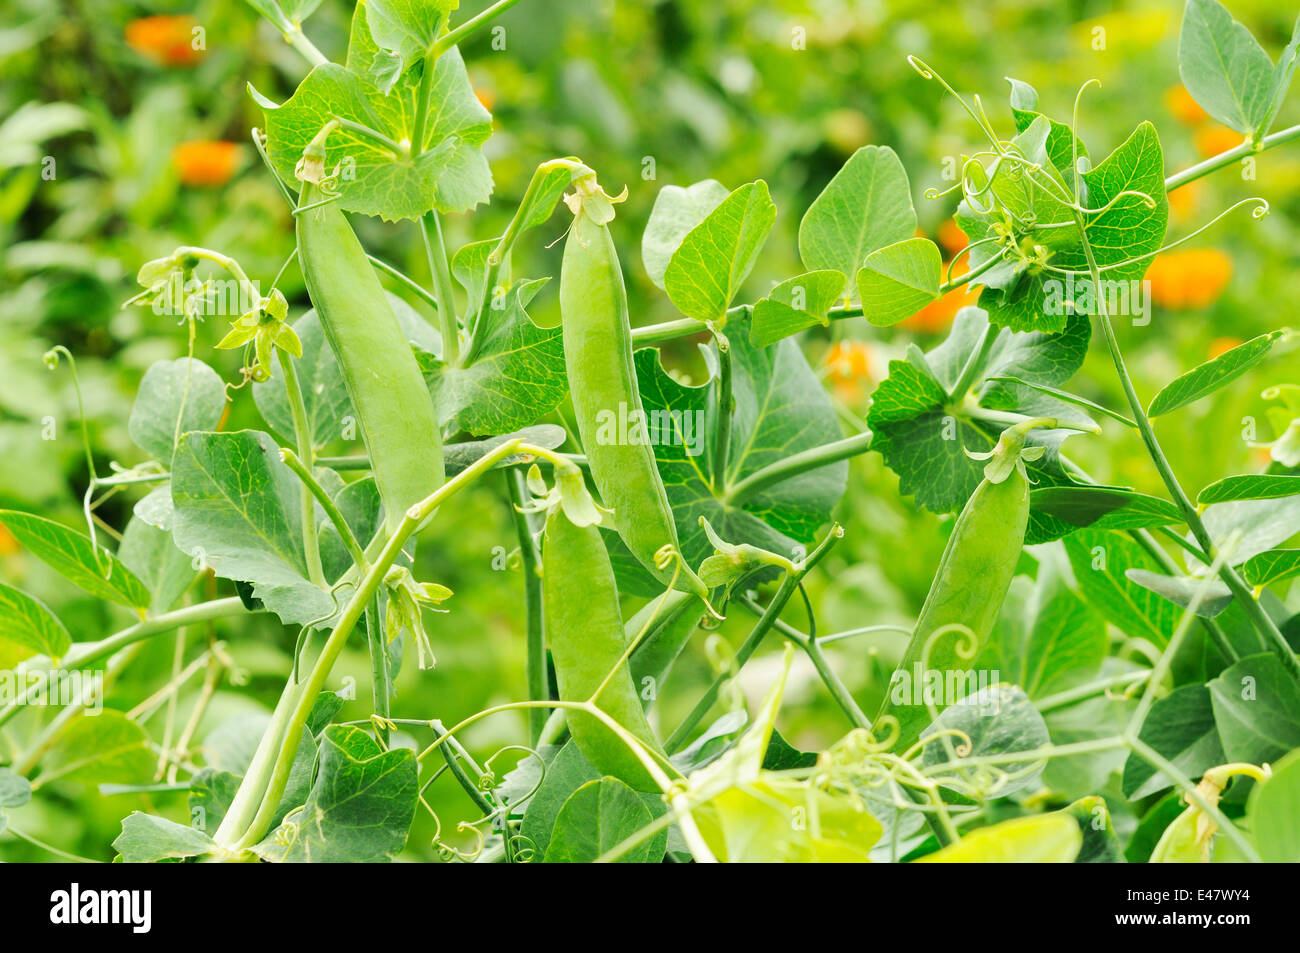 bush of peas with young pods growing Stock Photo